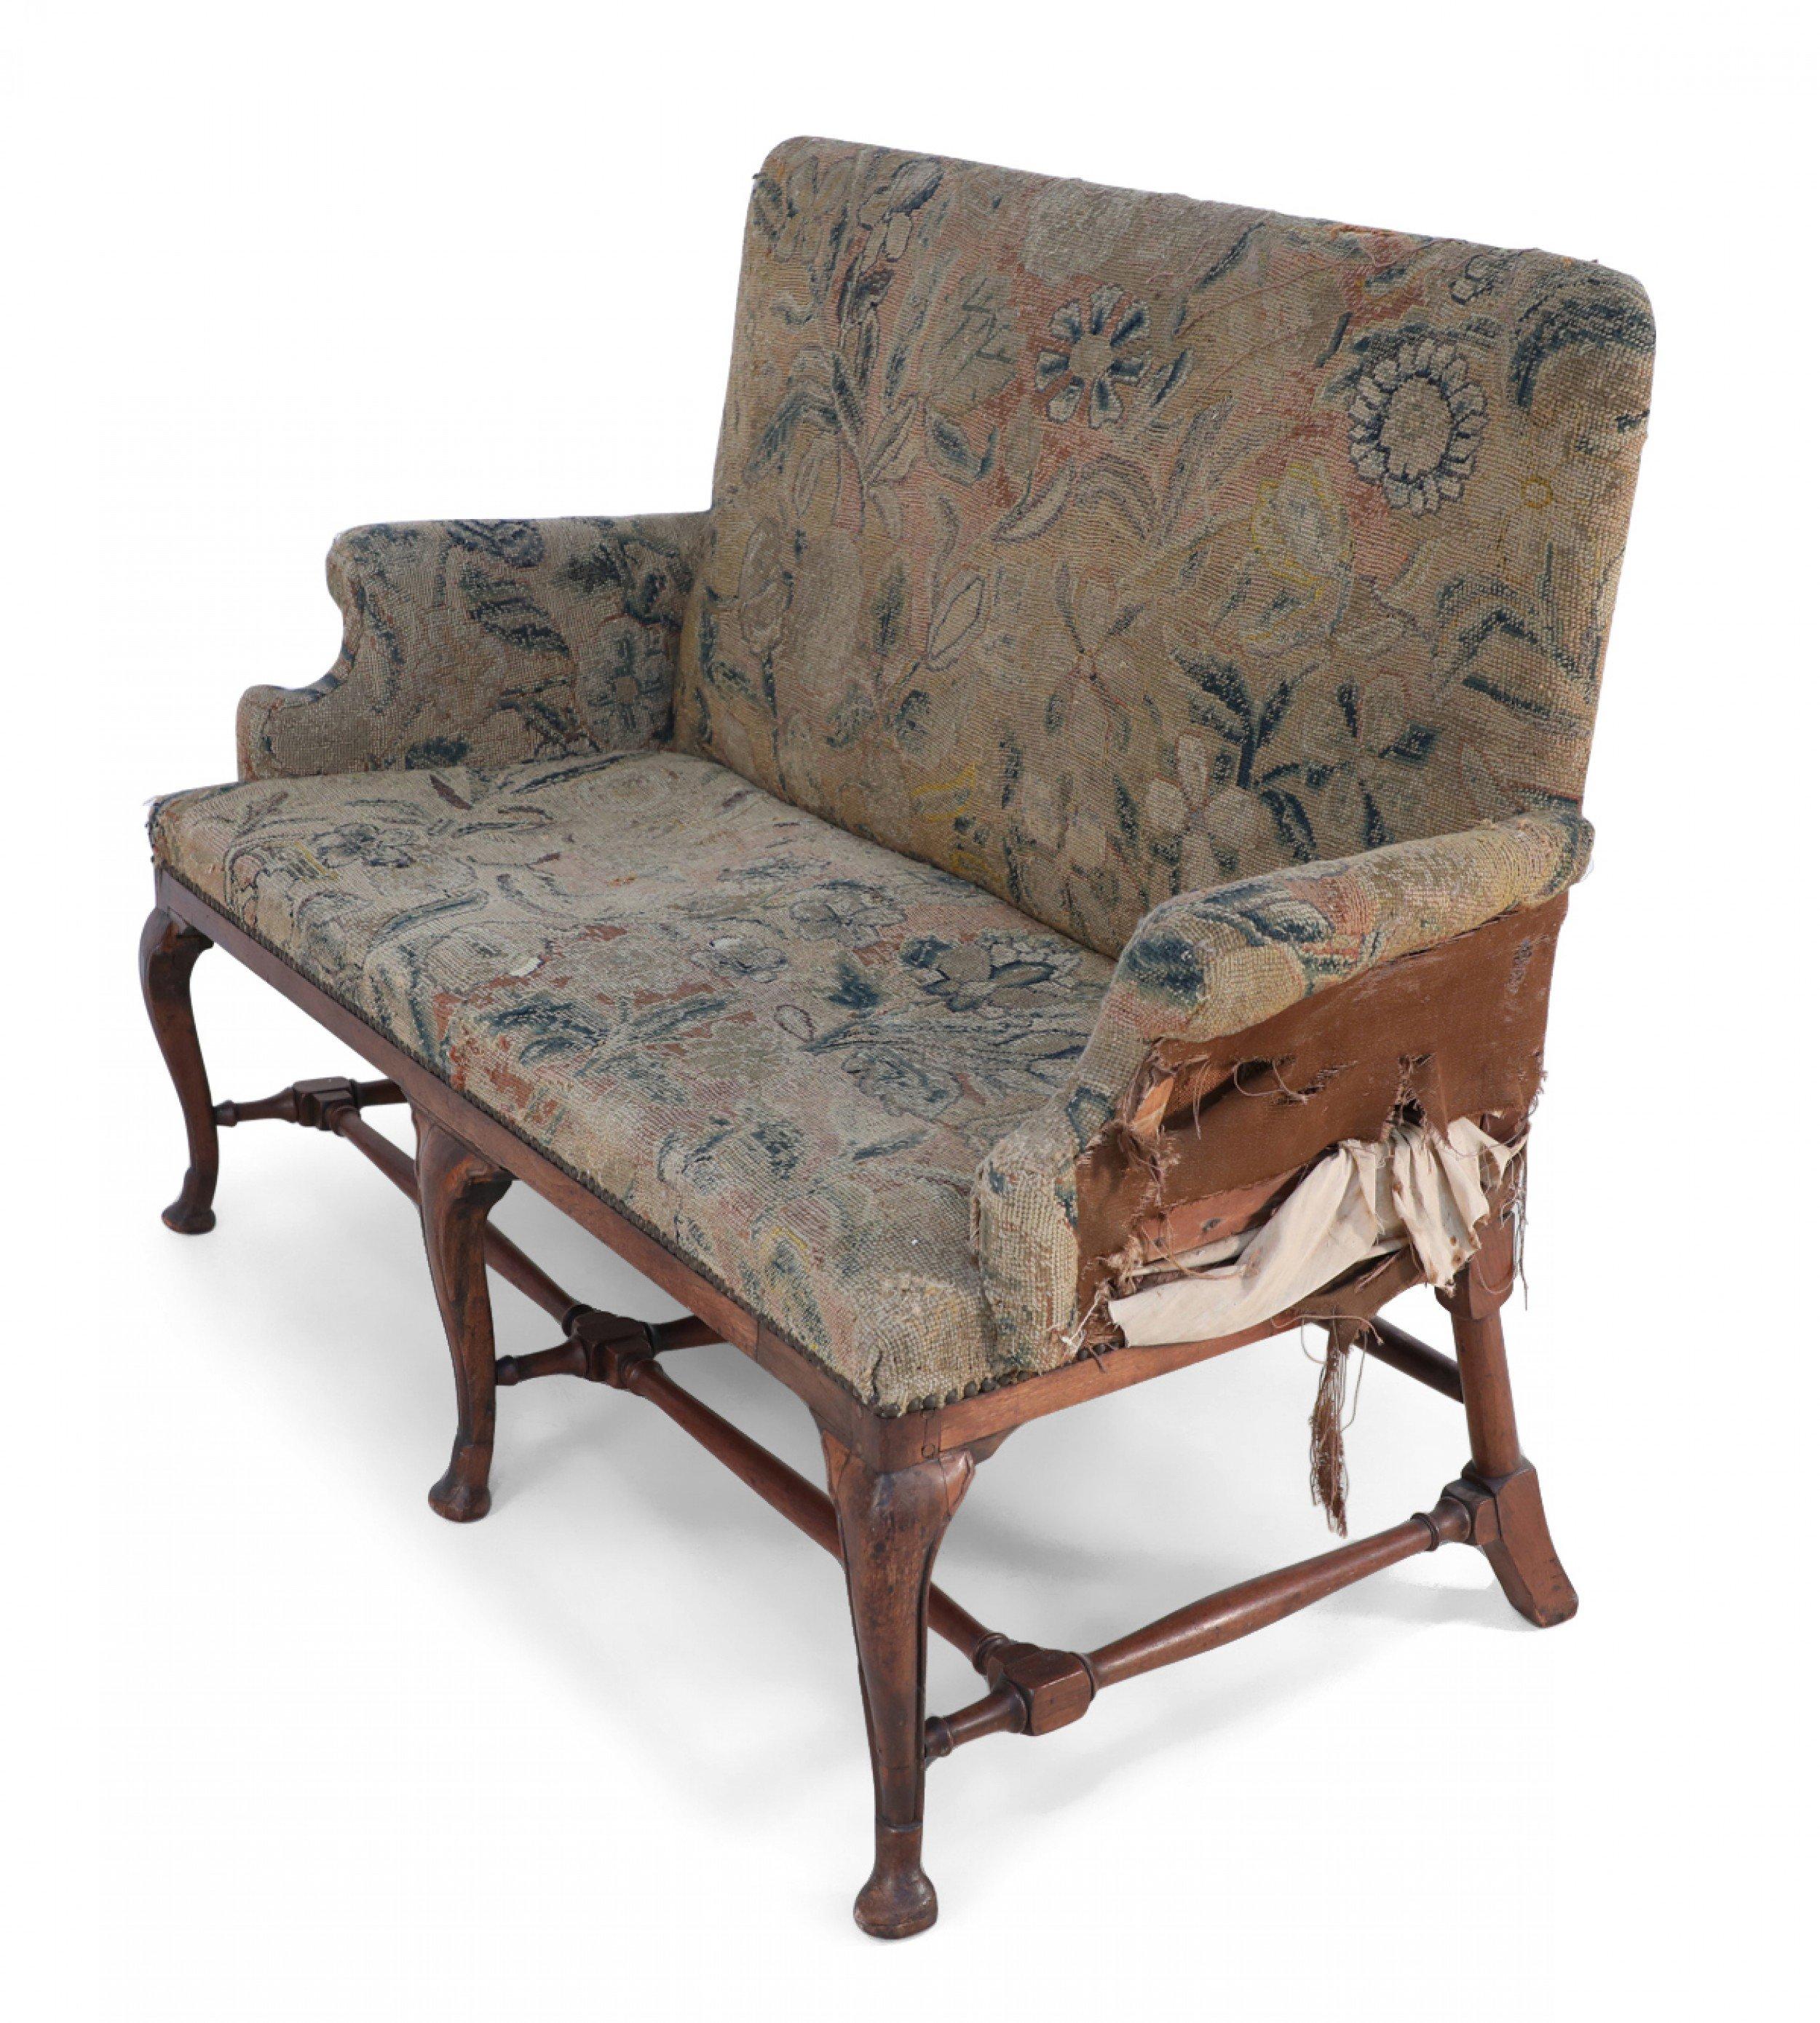 English Queen Anne (18th Century) loveseat with floral needlepoint tapestry upholstery (as is) and a walnut frame with a stretcher base and cabriole legs ending in pad feet.
 